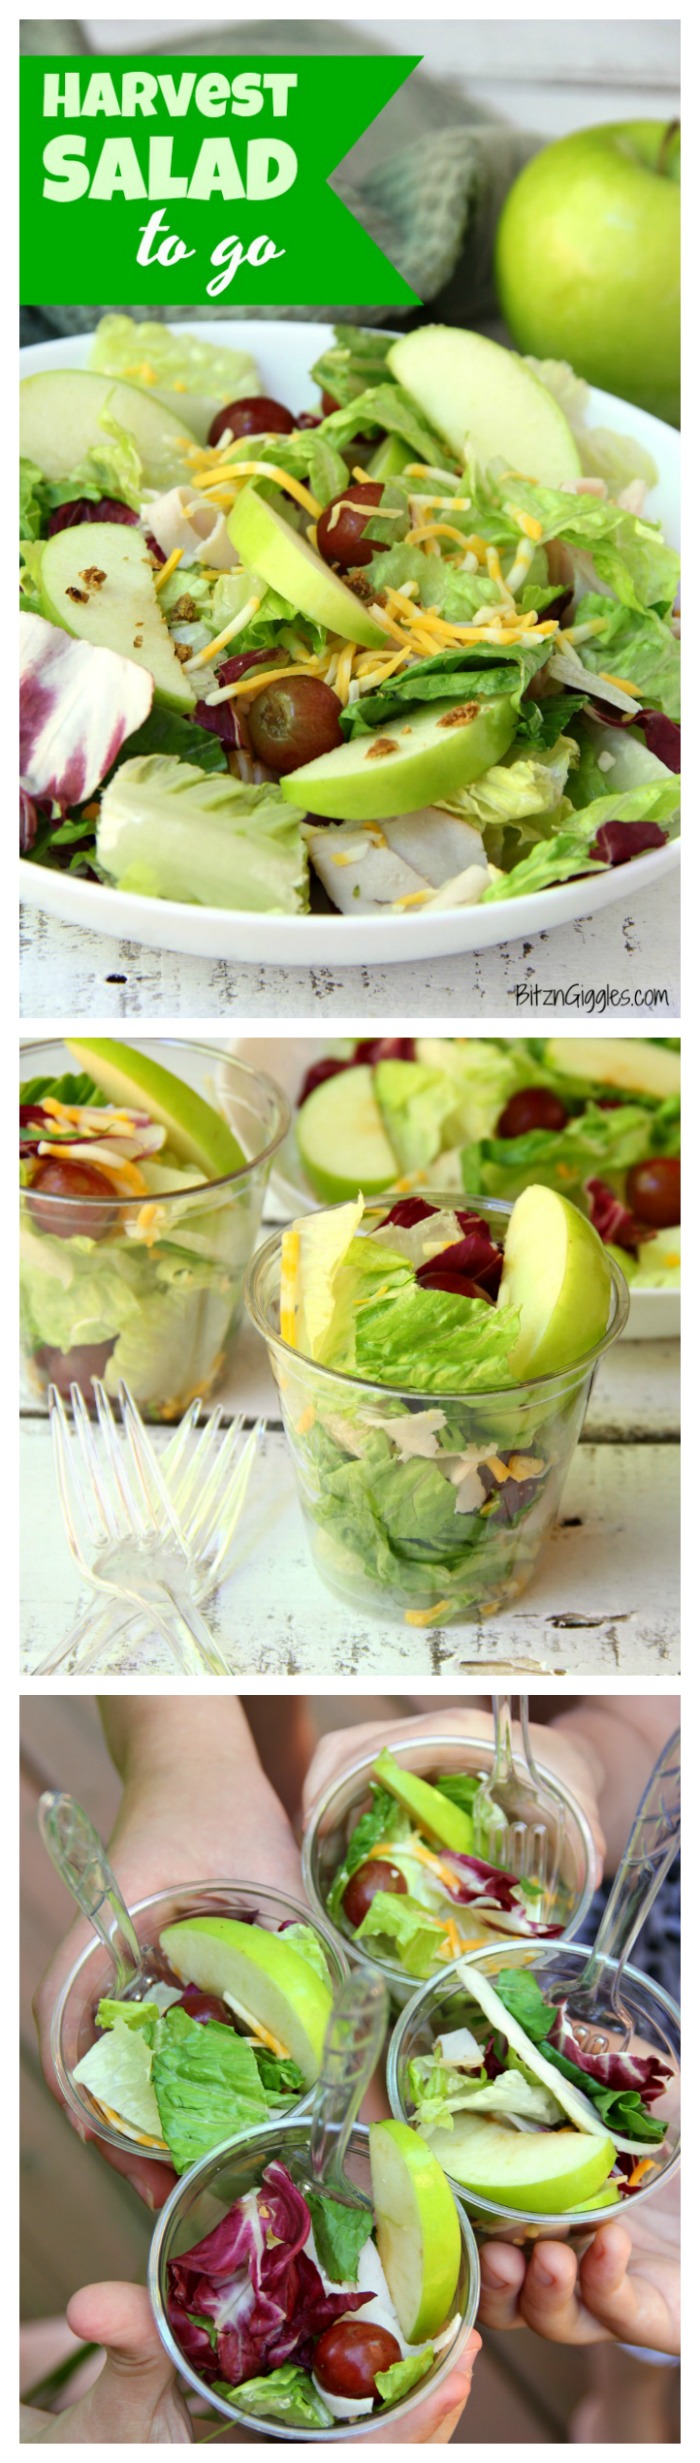 Harvest Salad to Go - A delicious combination of granny smith apples, grapes, cheese, bacon bits and more make this a perfect addition to any party menu! Serve in cups for easy and convenient eating!